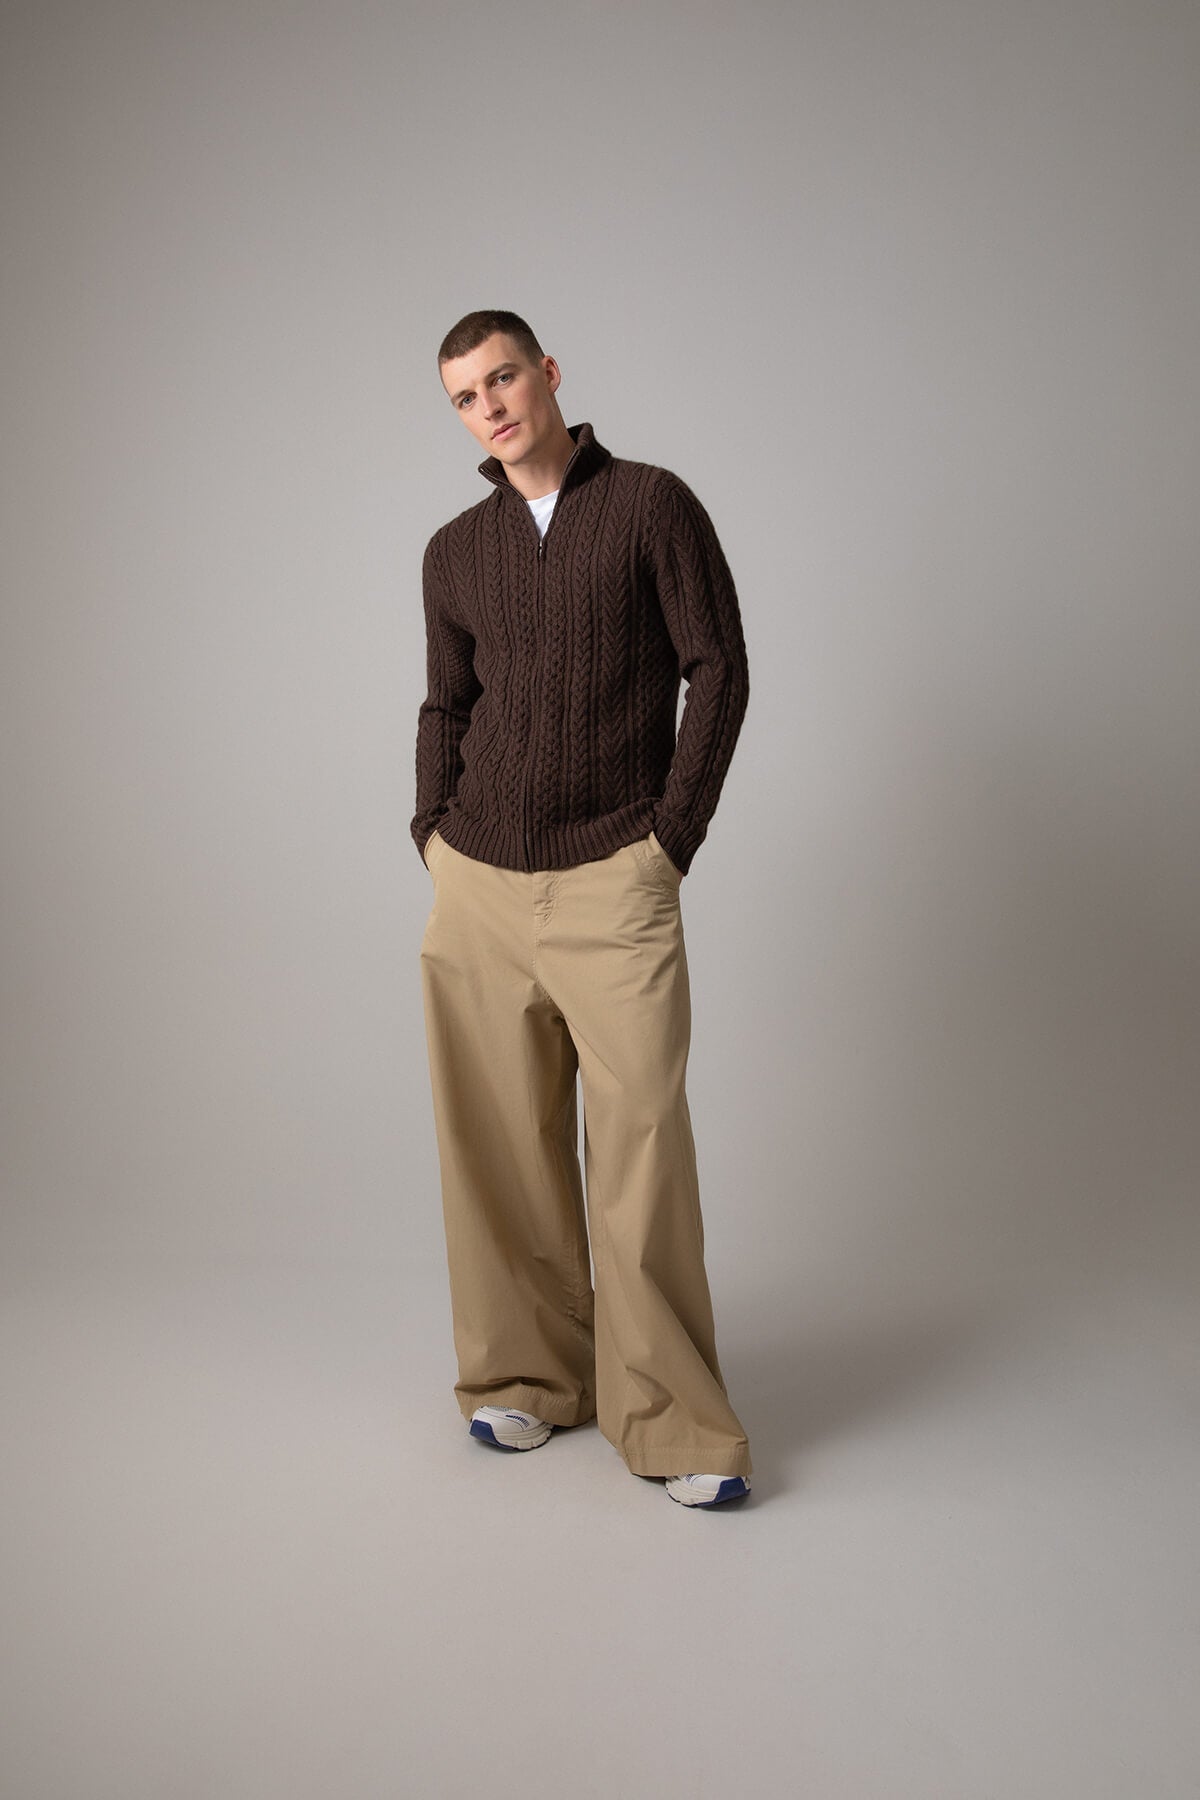 Johnstons of Elgin’s Men's Aran Cable Cashmere Zip Cardigan in Peat on model wearing wide camel trousers on a grey background KAI05119Q23708